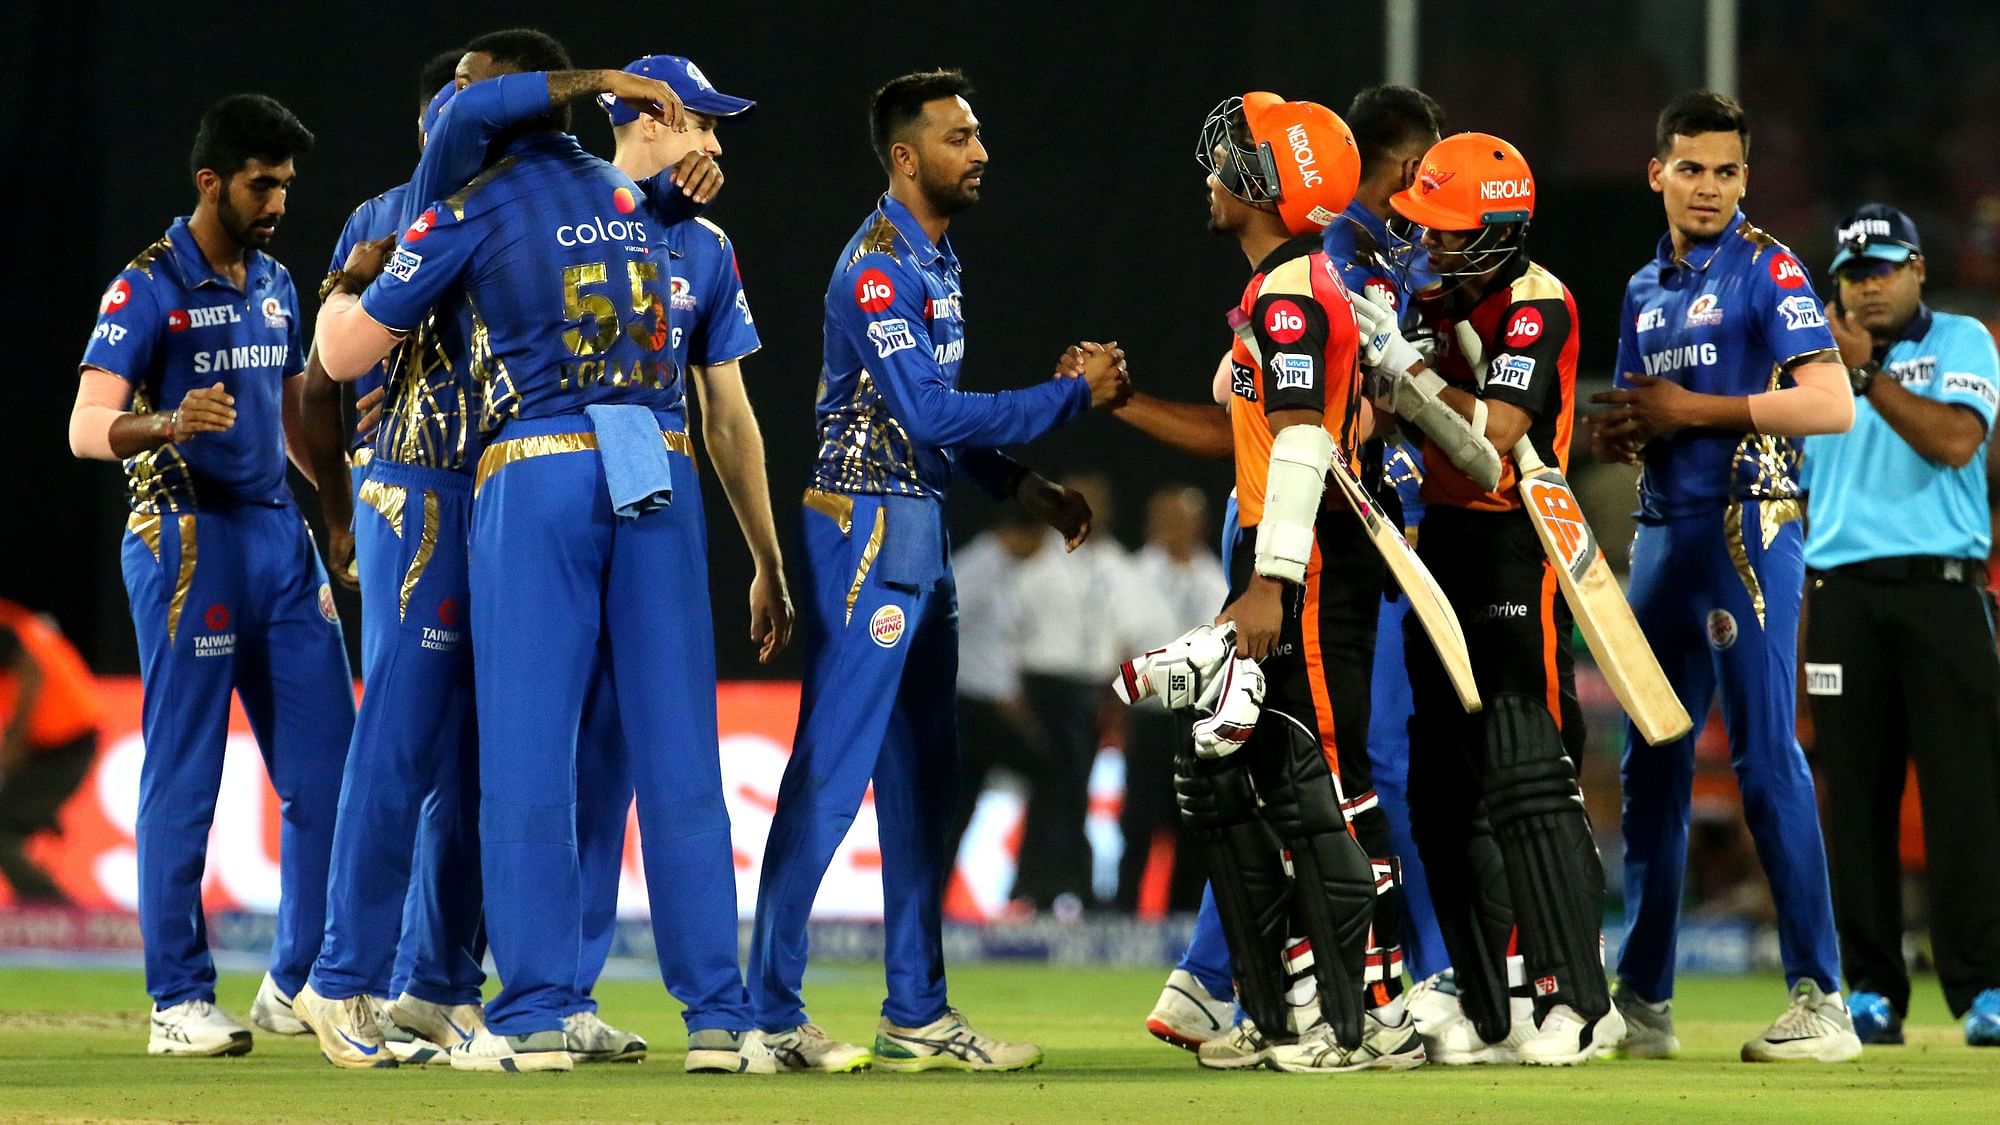 Chasing a paltry total of 137, Sunriser Hyderabad were all-out for 96 as debutant Alzarri Joseph of Mumbai Indians ripped through the Hyderabad batting line-up.